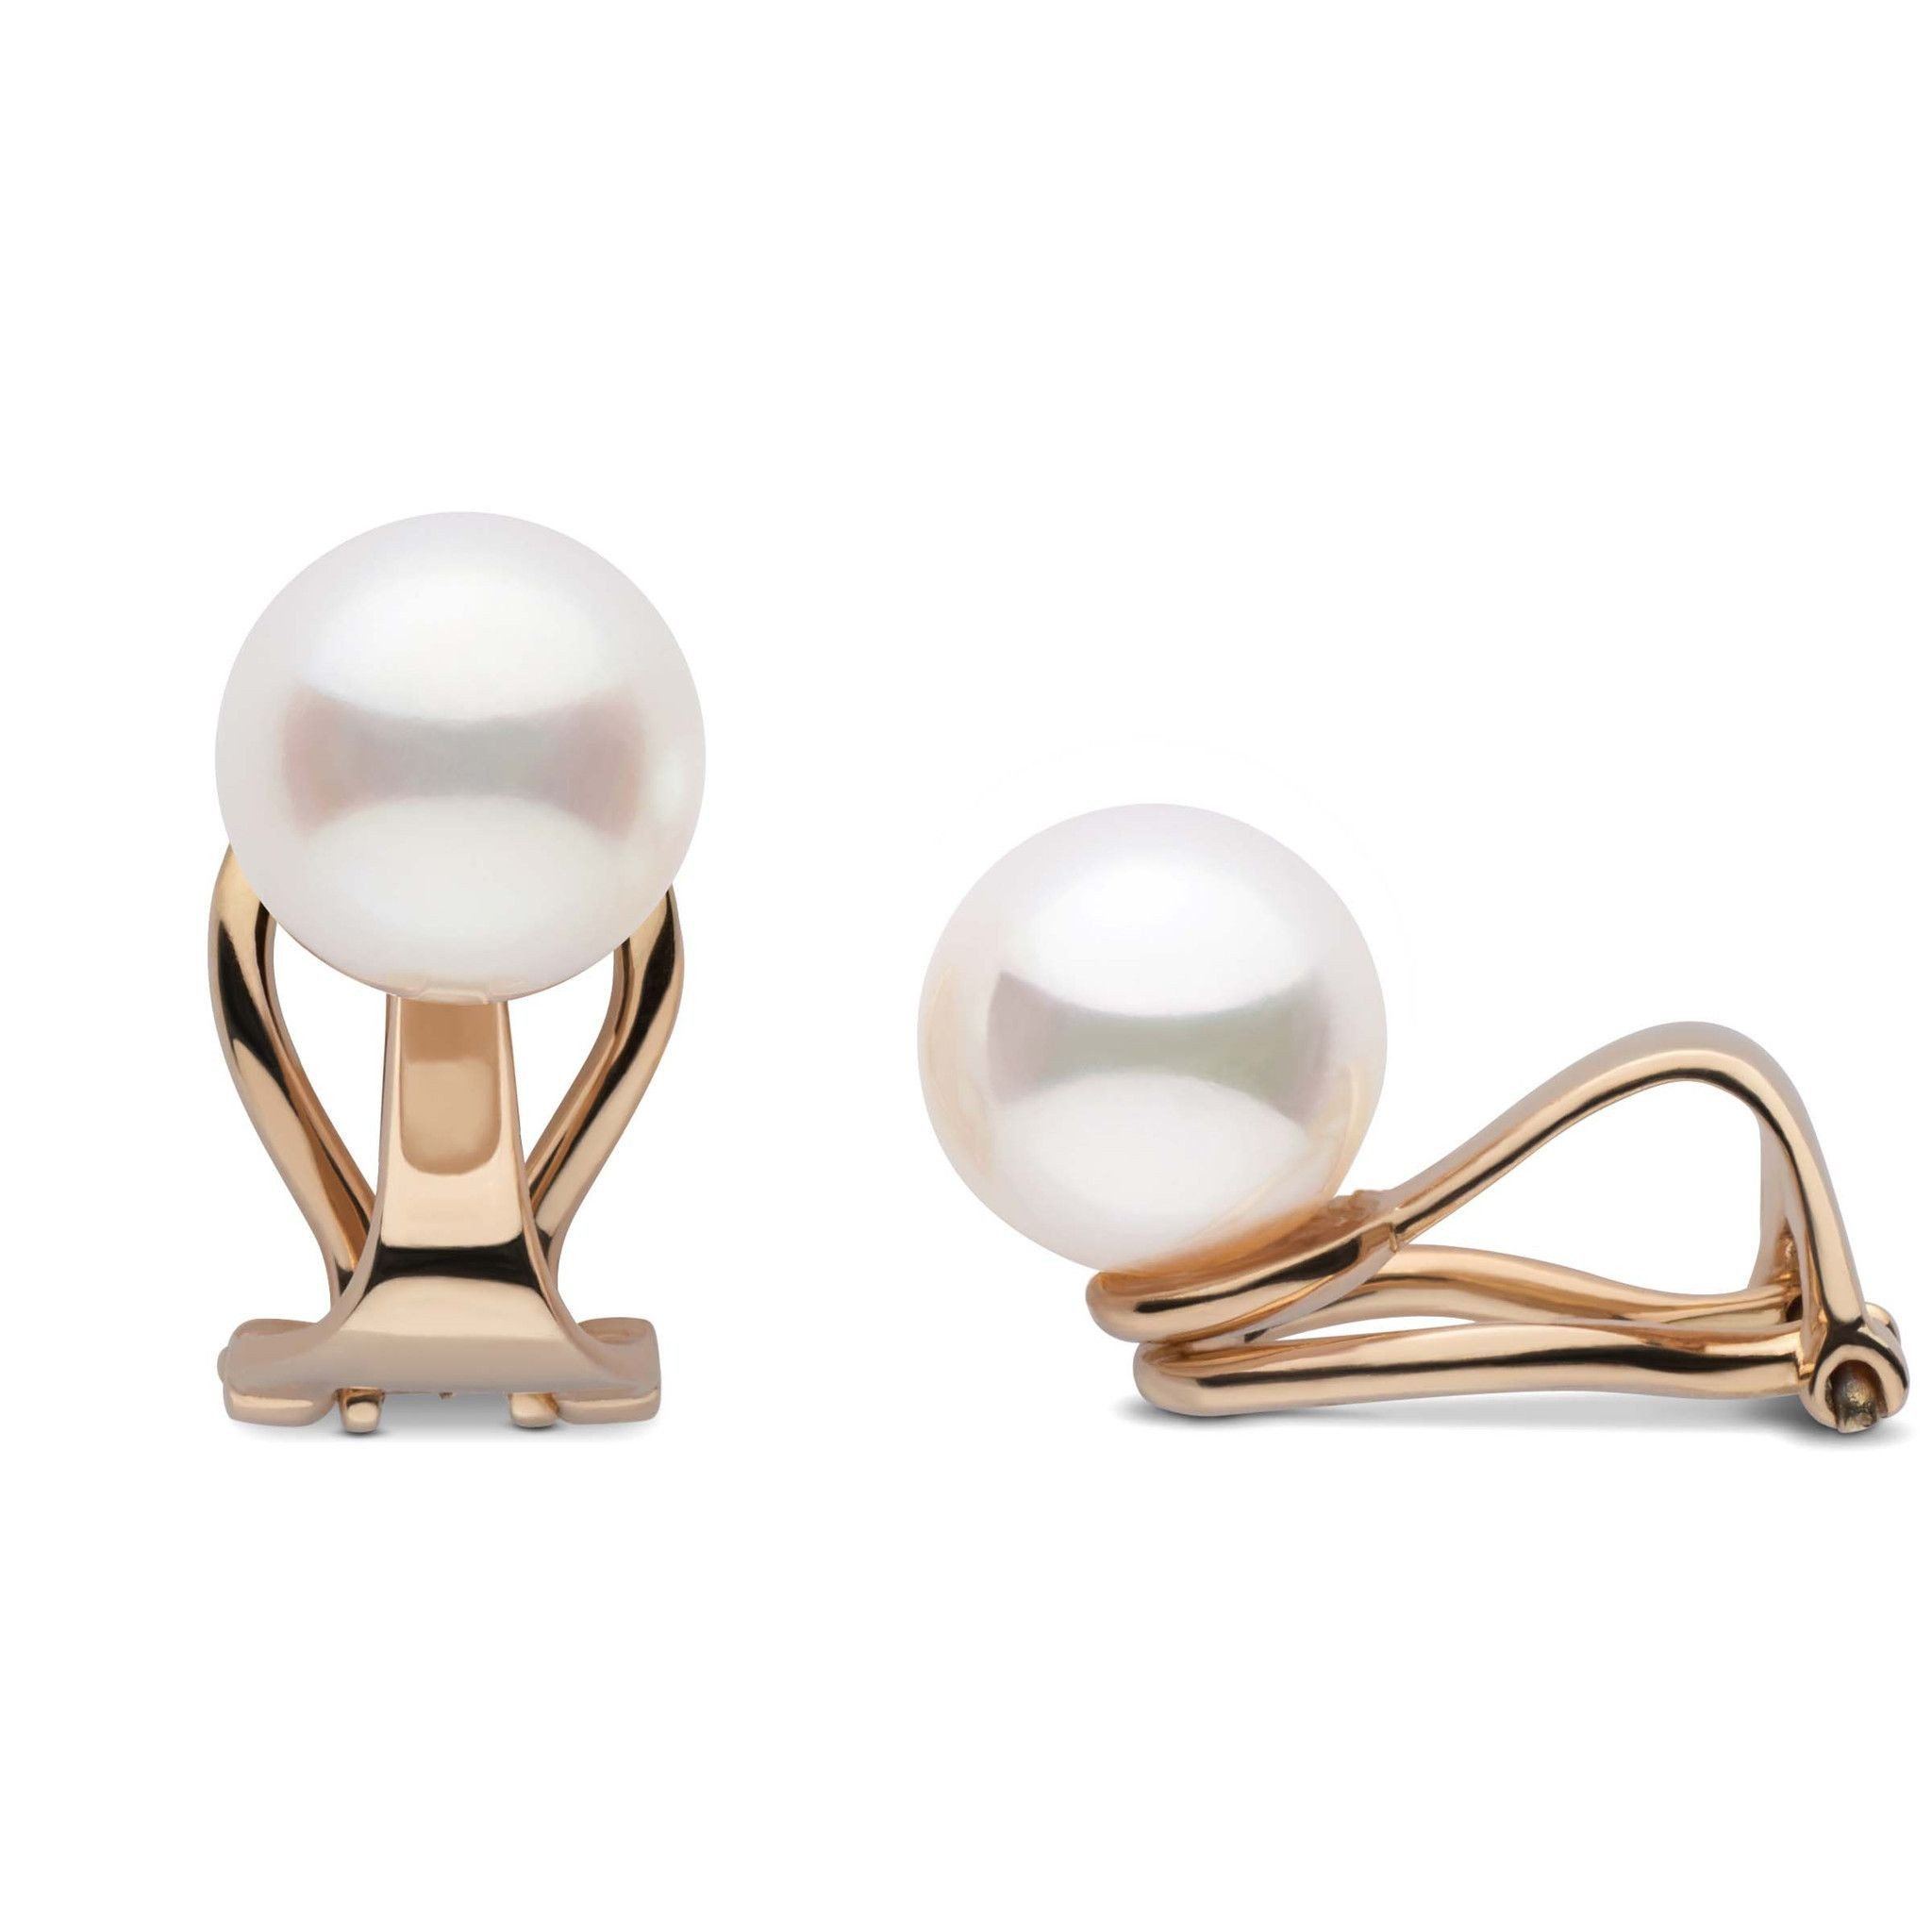 Freshadama freshwater 8.5-9.0 mm Clip-on Pearl Earrings for non-pierced ears in yellow gold